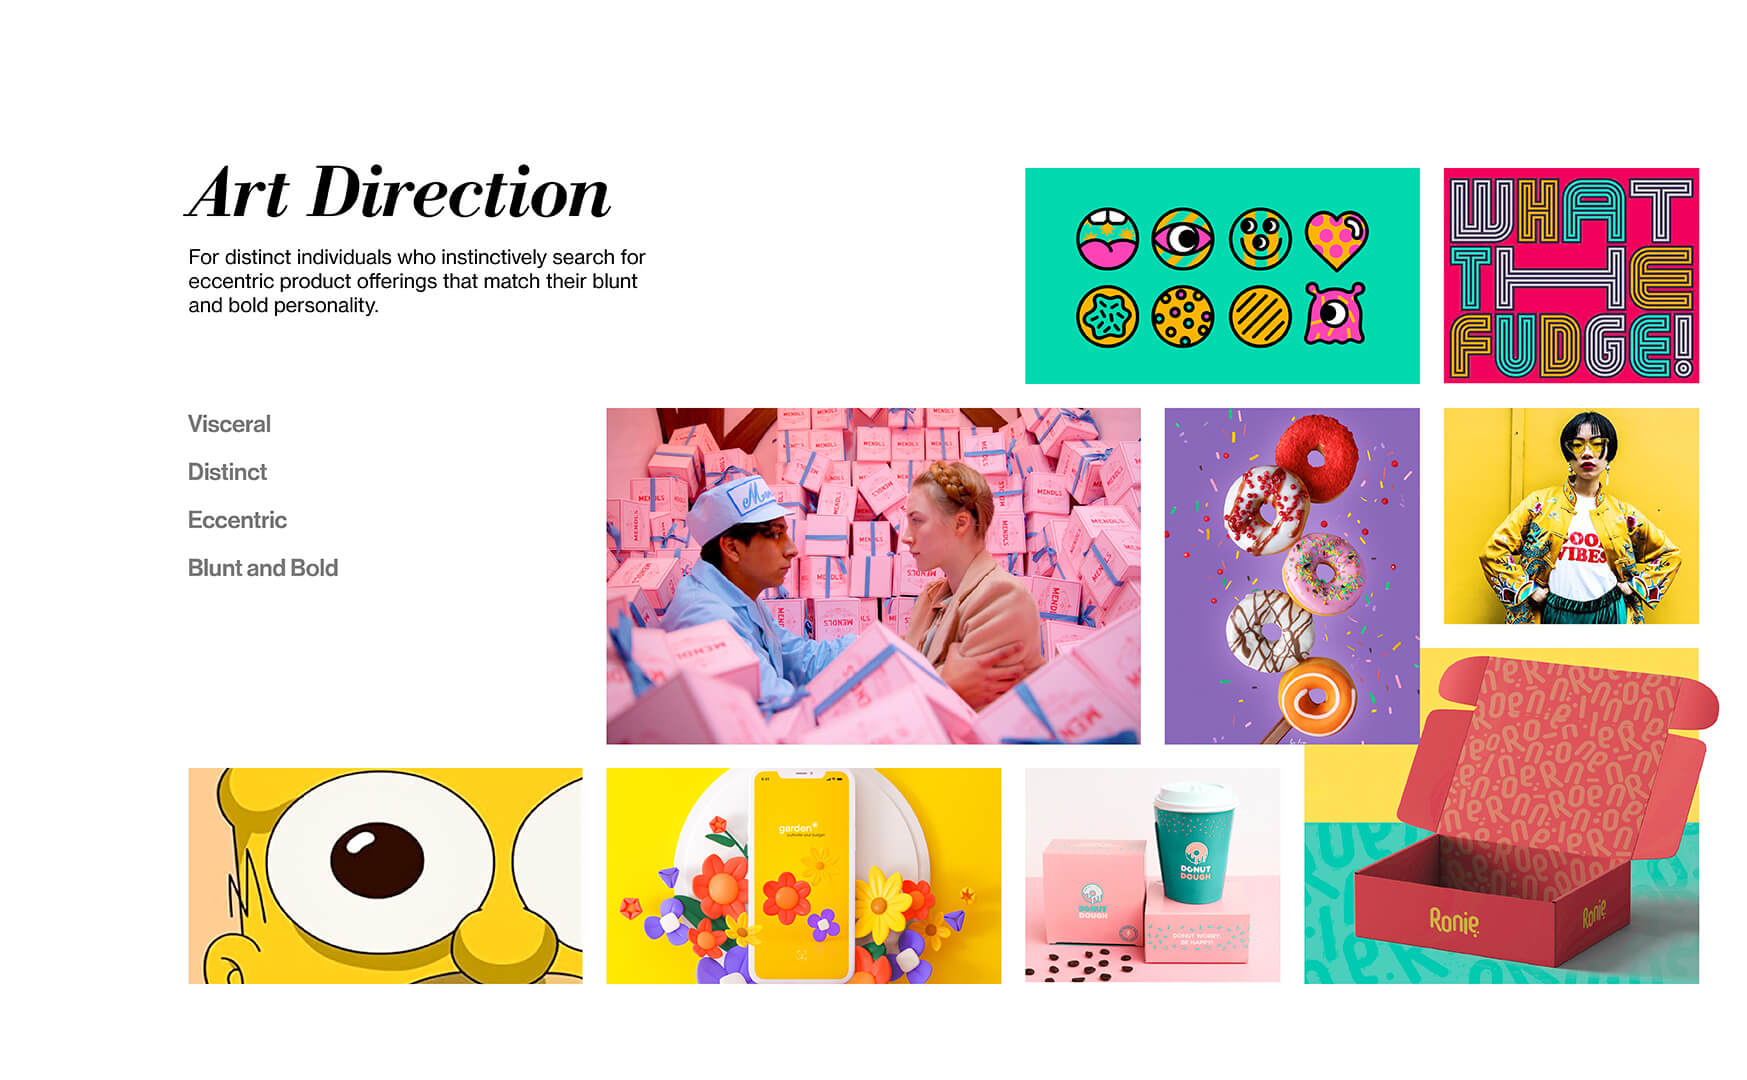 a moodboard visually communicating the art direction for the Dipp'd website